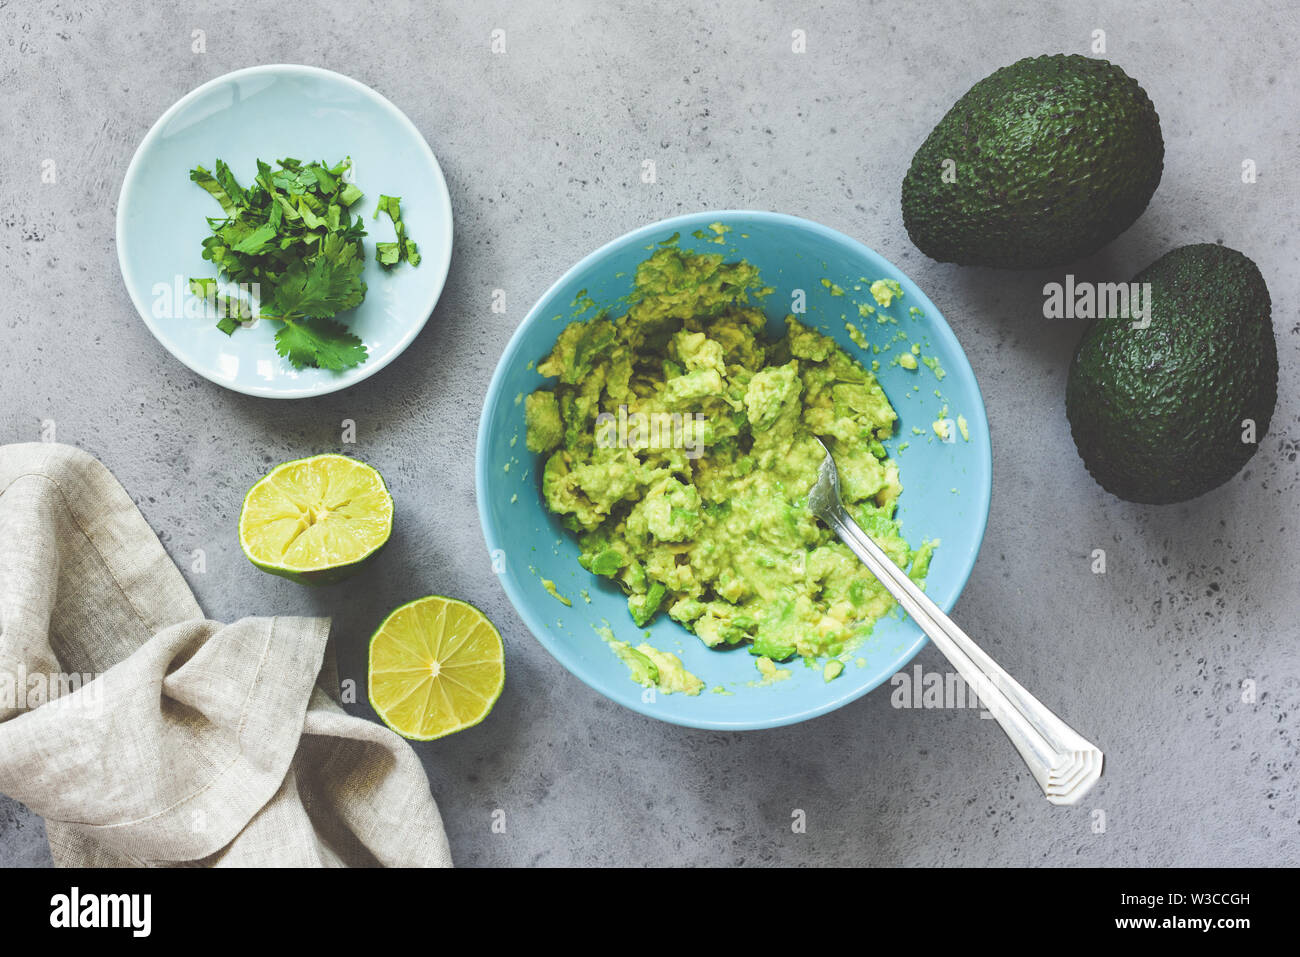 Mashed avocado guacamole sauce in blue ceramic bowl on grey concrete background. Table top view. Healthy vegan vegetarian food, spread for bread or to Stock Photo